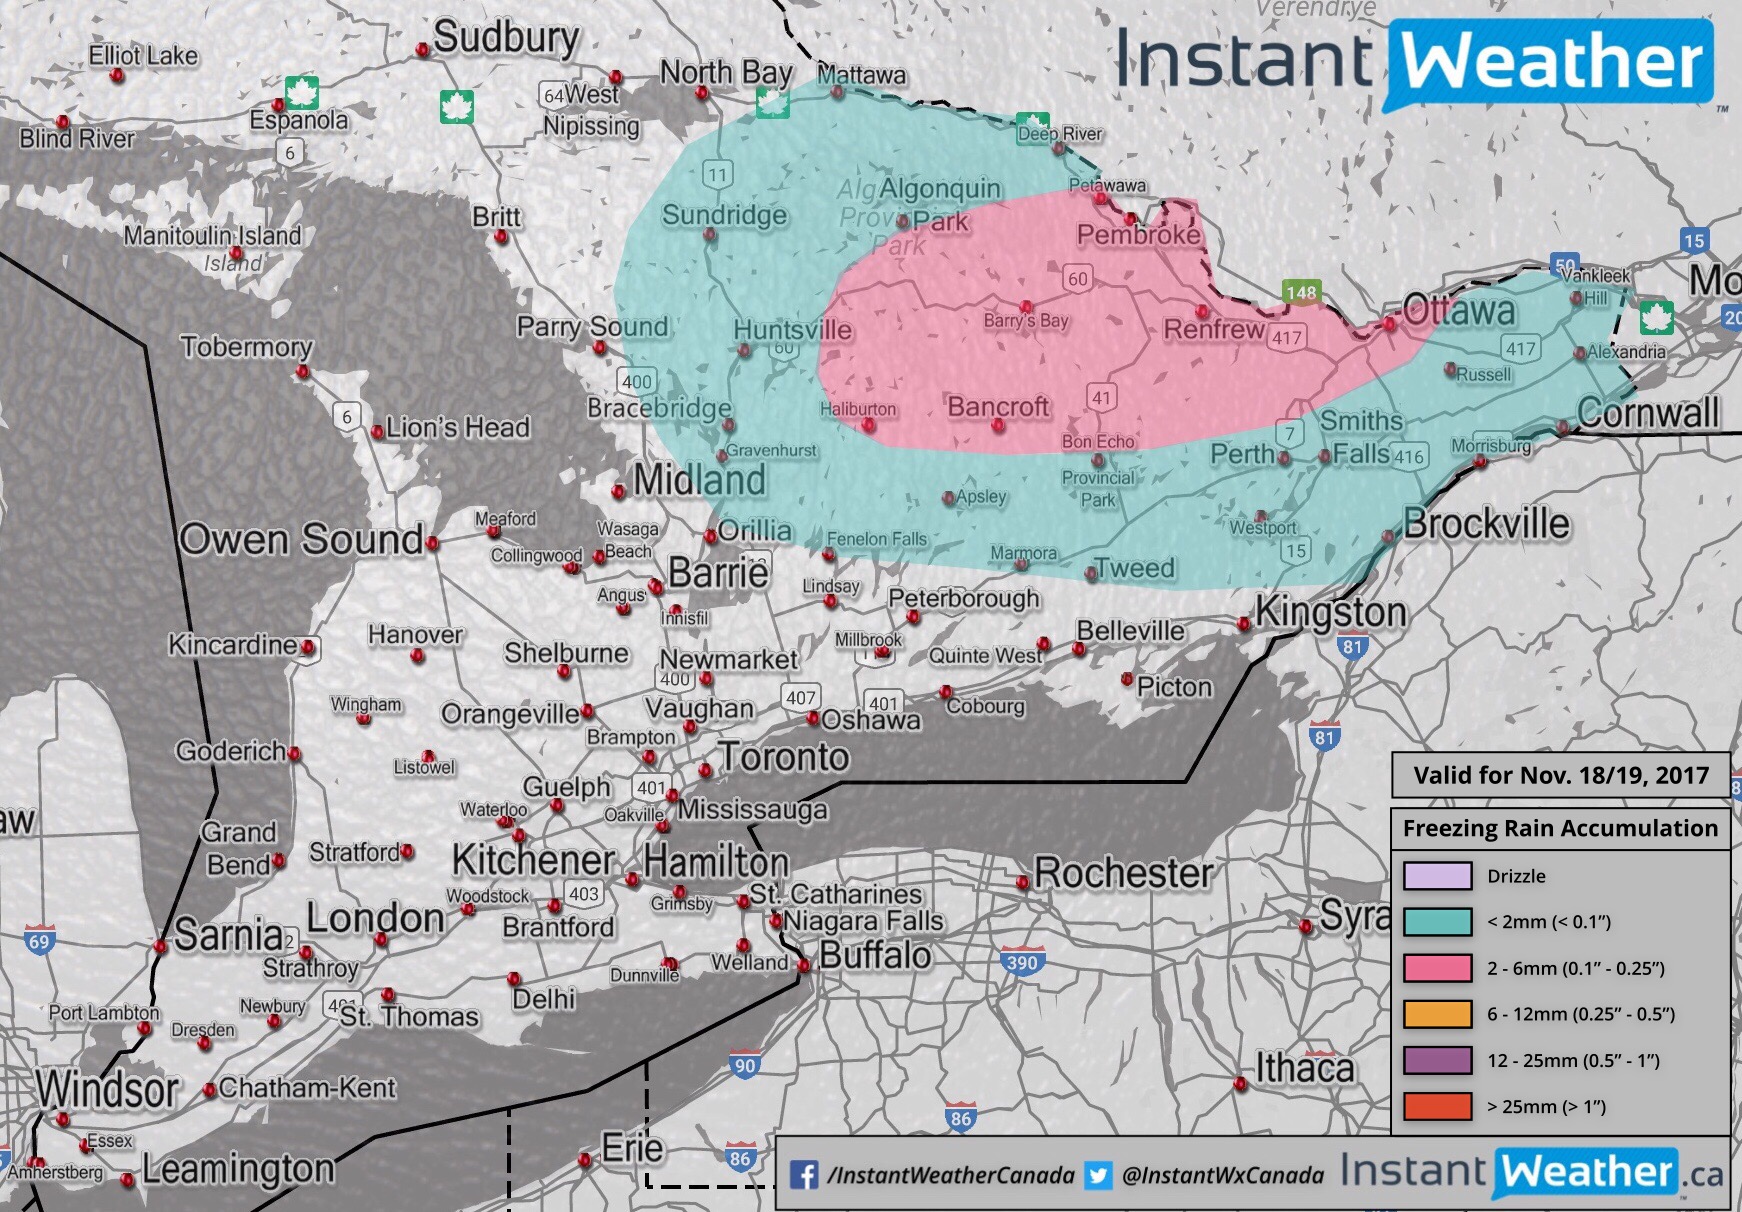 Winter Storm to Impact Southern Ontario with Freezing Rain and up to